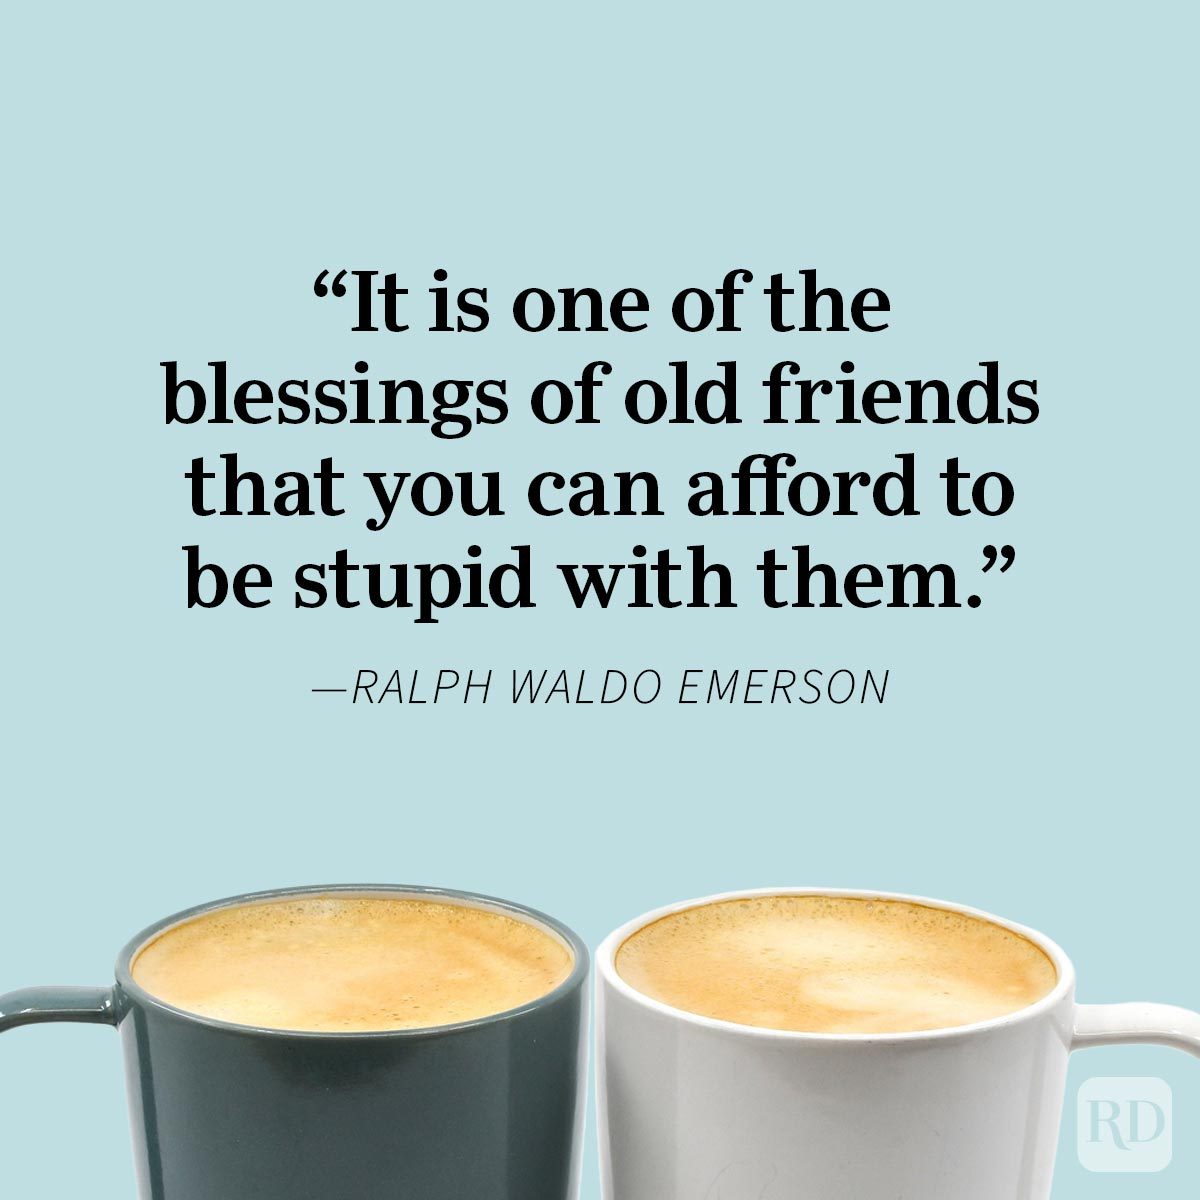 Friendship Quotes To Share With Your Bestie Ralph Waldo Emerson two coffee mugs, blue